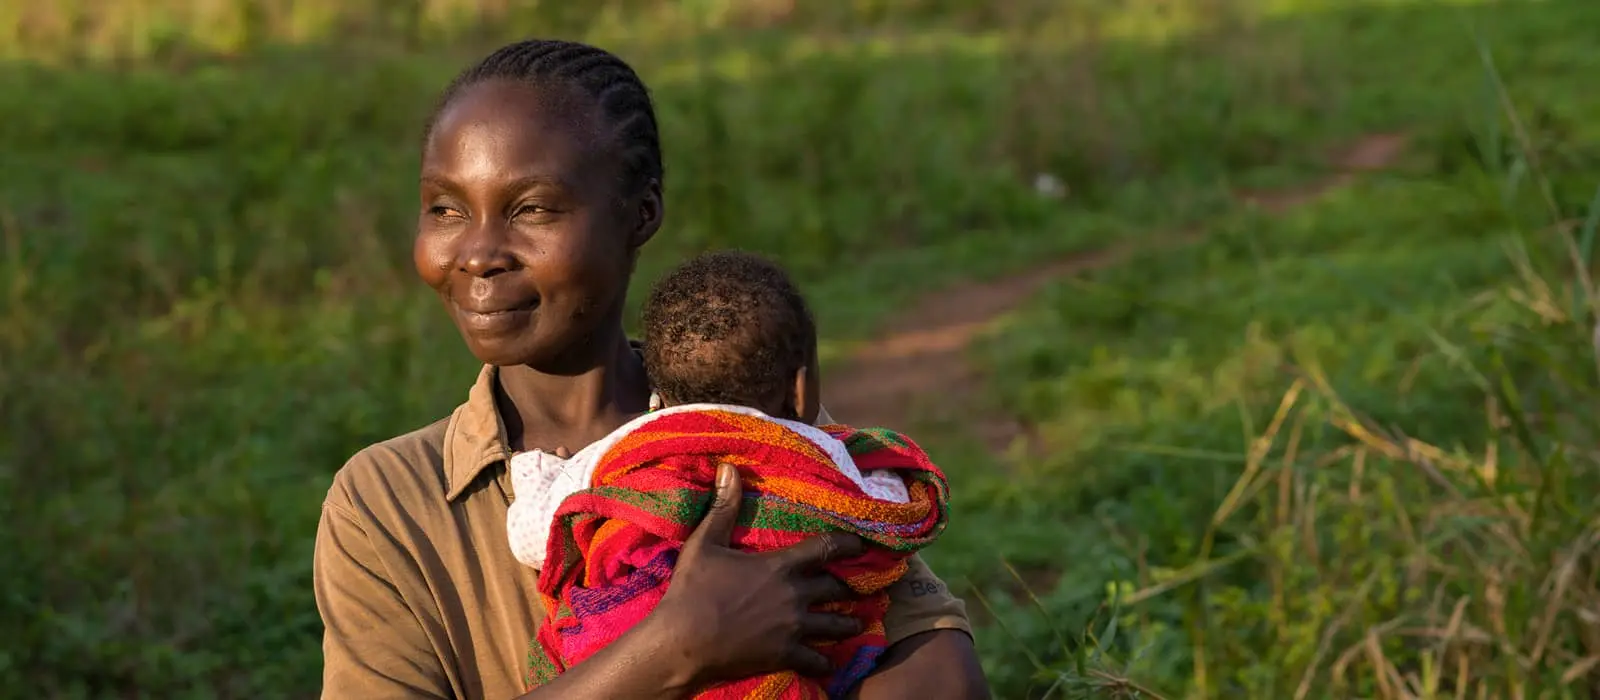 Natalie Wato holding her five-week-old son Sauvenator on the small plot of land the family tends near their home.